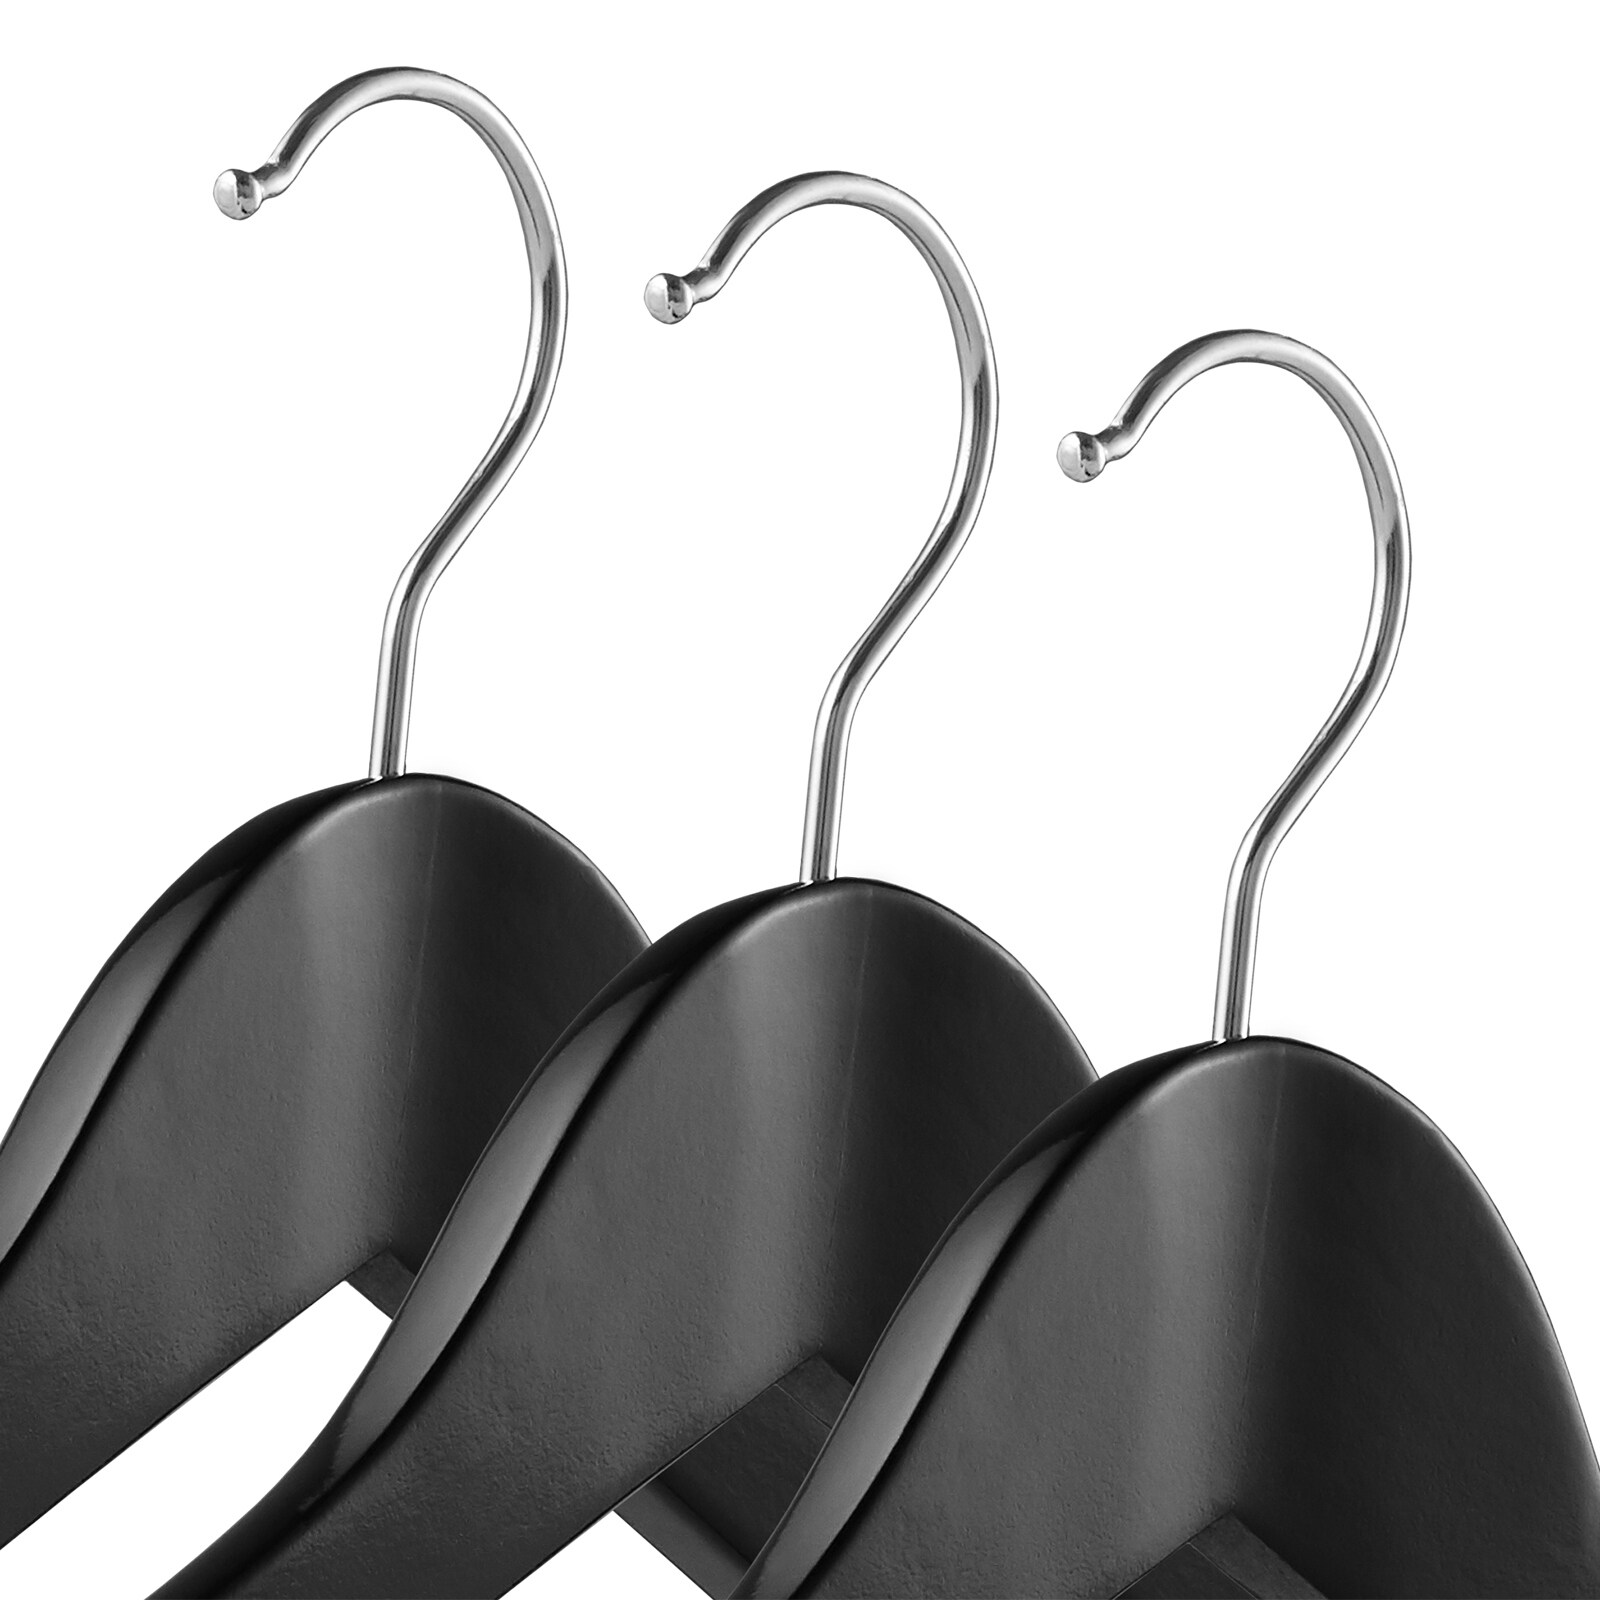 https://ak1.ostkcdn.com/images/products/is/images/direct/8d2bc57b6695bad8c8ee66d5112736d5327567dc/6-Pack-Wide-Shoulder-Wooden-Suit-Hangers-by-Casafield.jpg